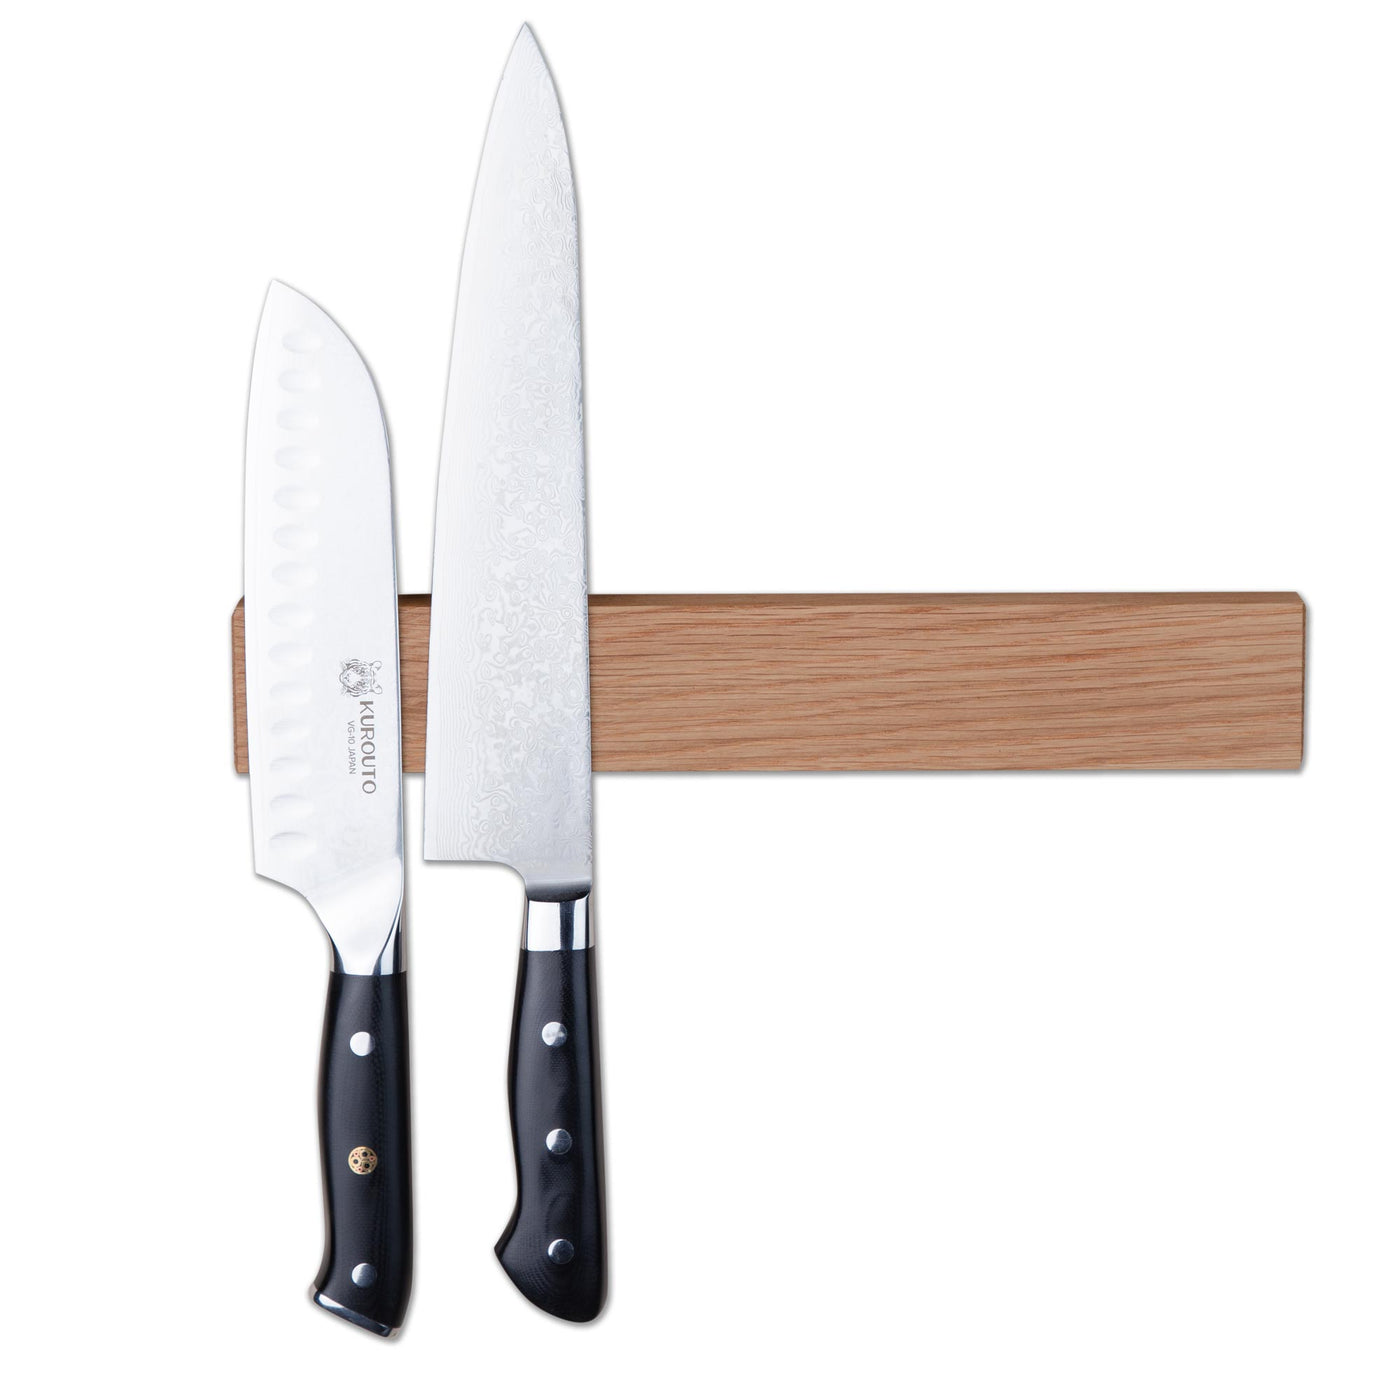 Kurouto Kitchenware White Oak Magnetic Knife Block -12 Inch -Made in the USA